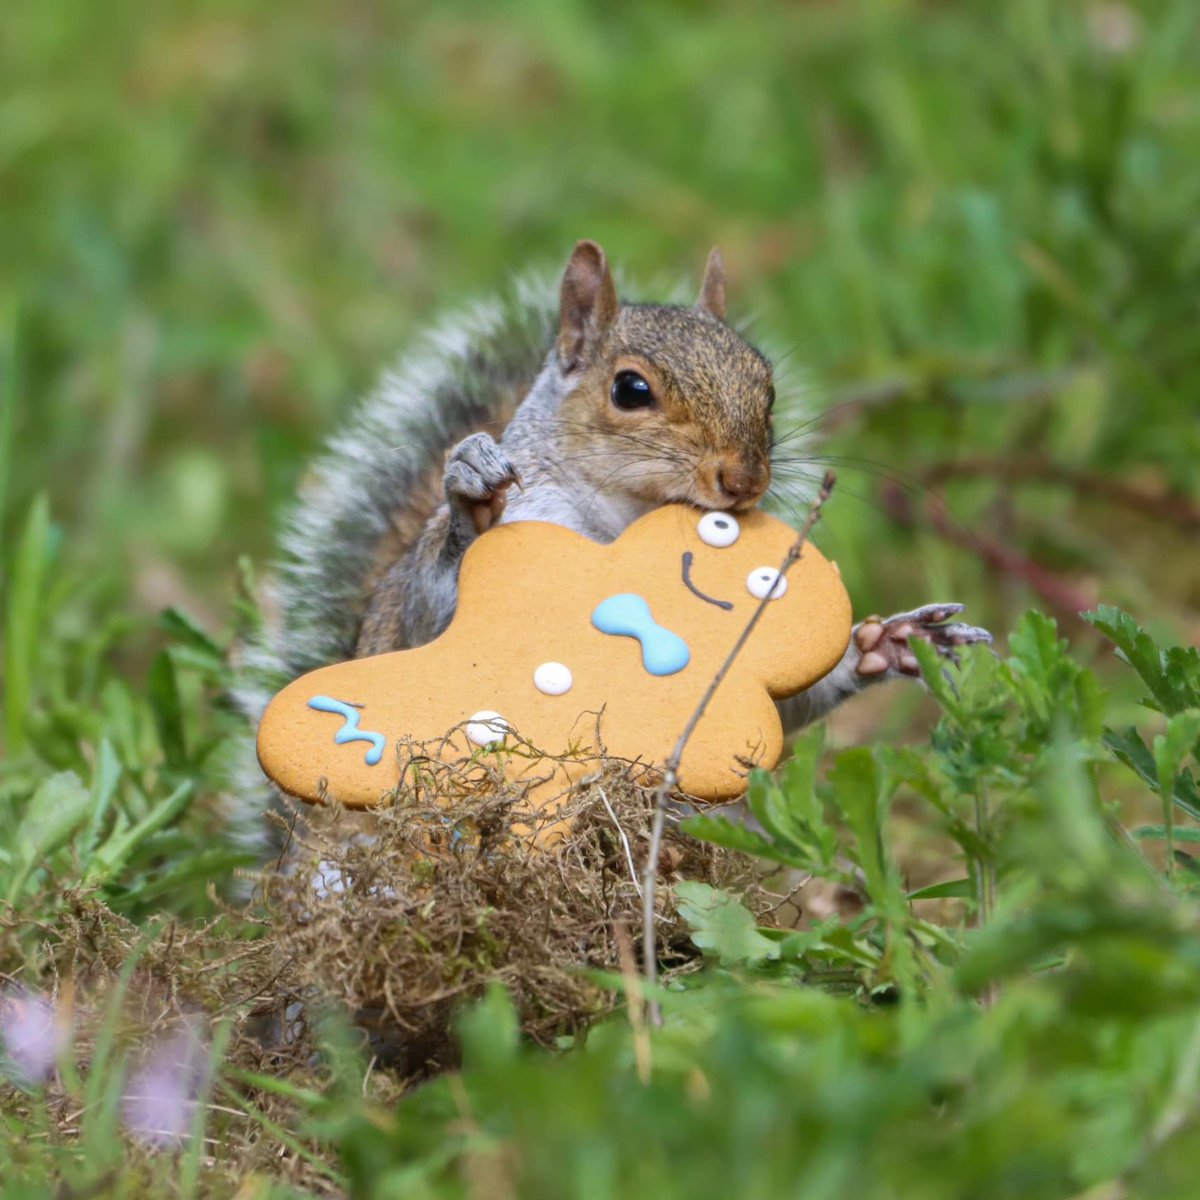 Who doesn’t like a gingerbread man? 🍪🐿️😄
Photo by Matthew James Fox.
#squirrel #NaturePhotography #NatureLover #NatureBeauty #nature #WeAreNature #PhotoOfTheWeek #photooftheday #photographer